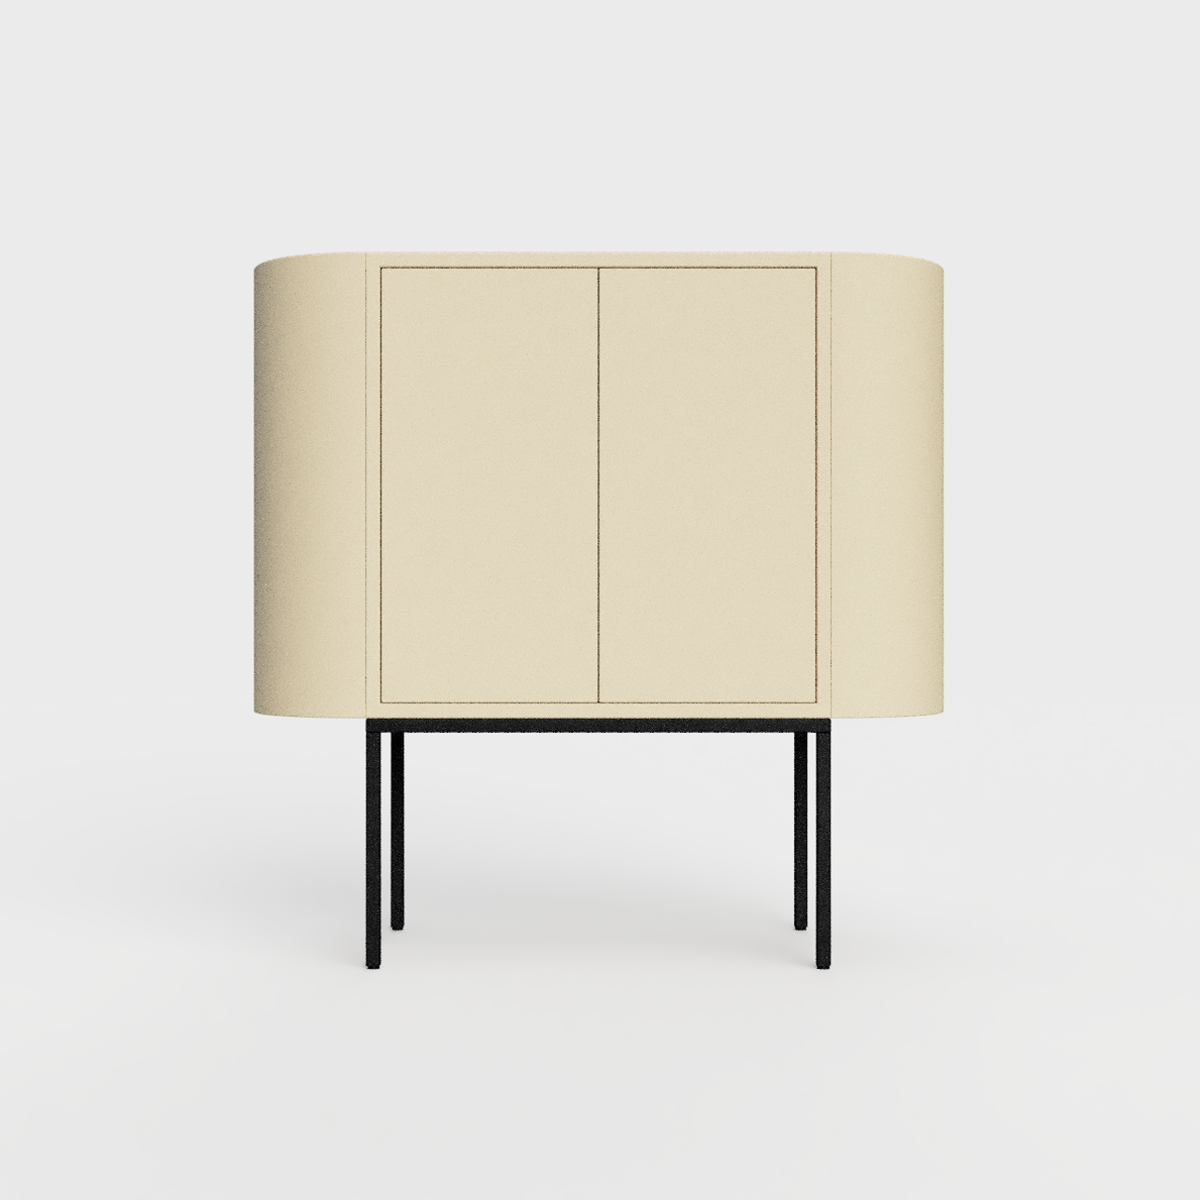 Siena 01 Sideboard in sand color, powder-coated steel, elegant and modern piece of furniture for your living room